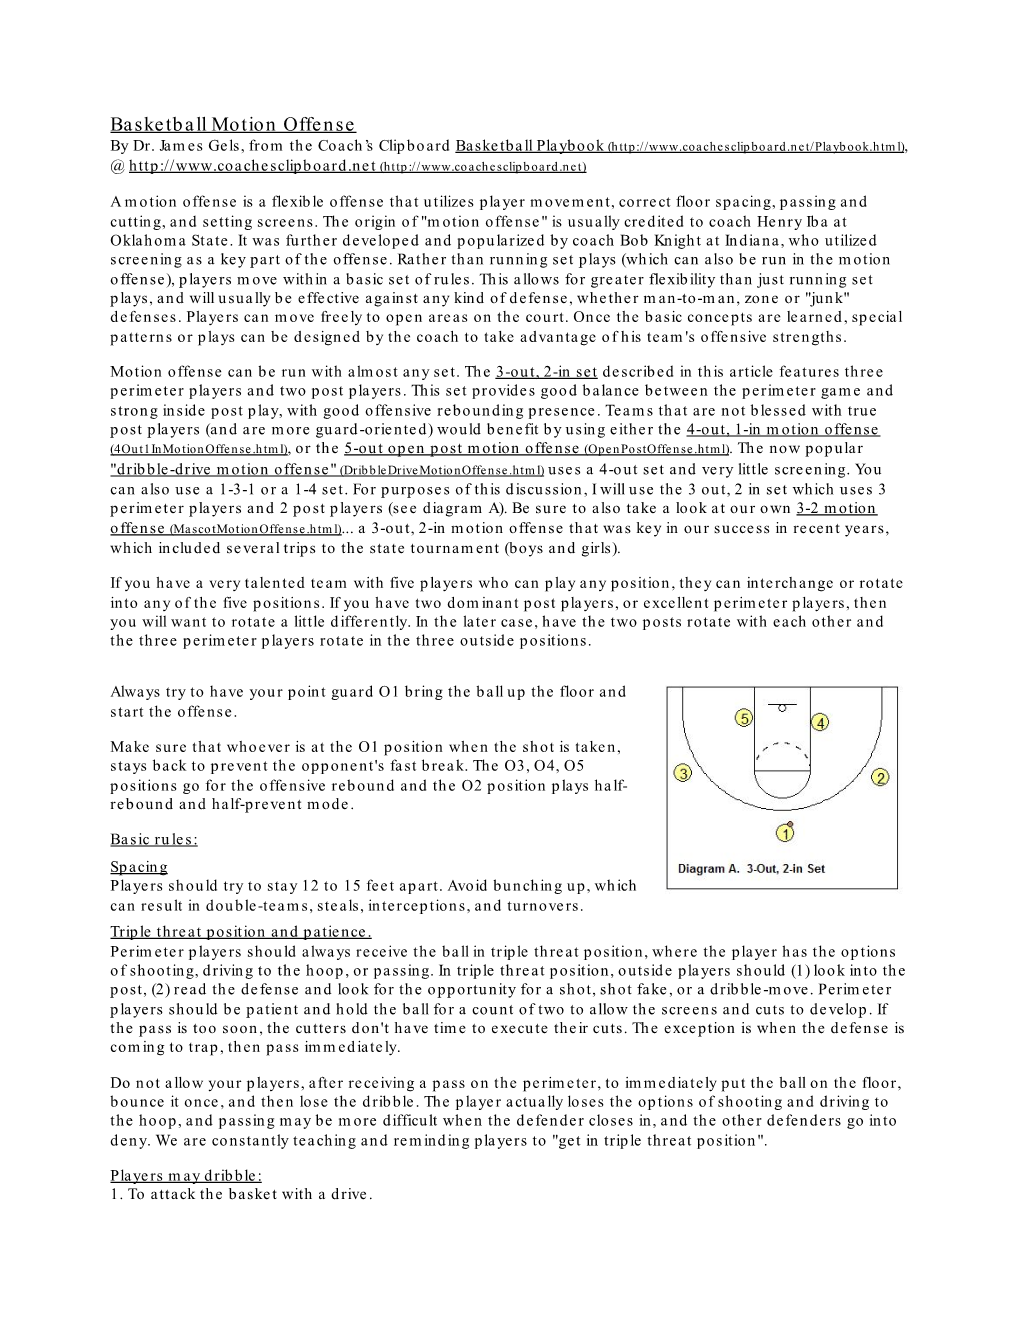 Basketball Motion Offense by Dr